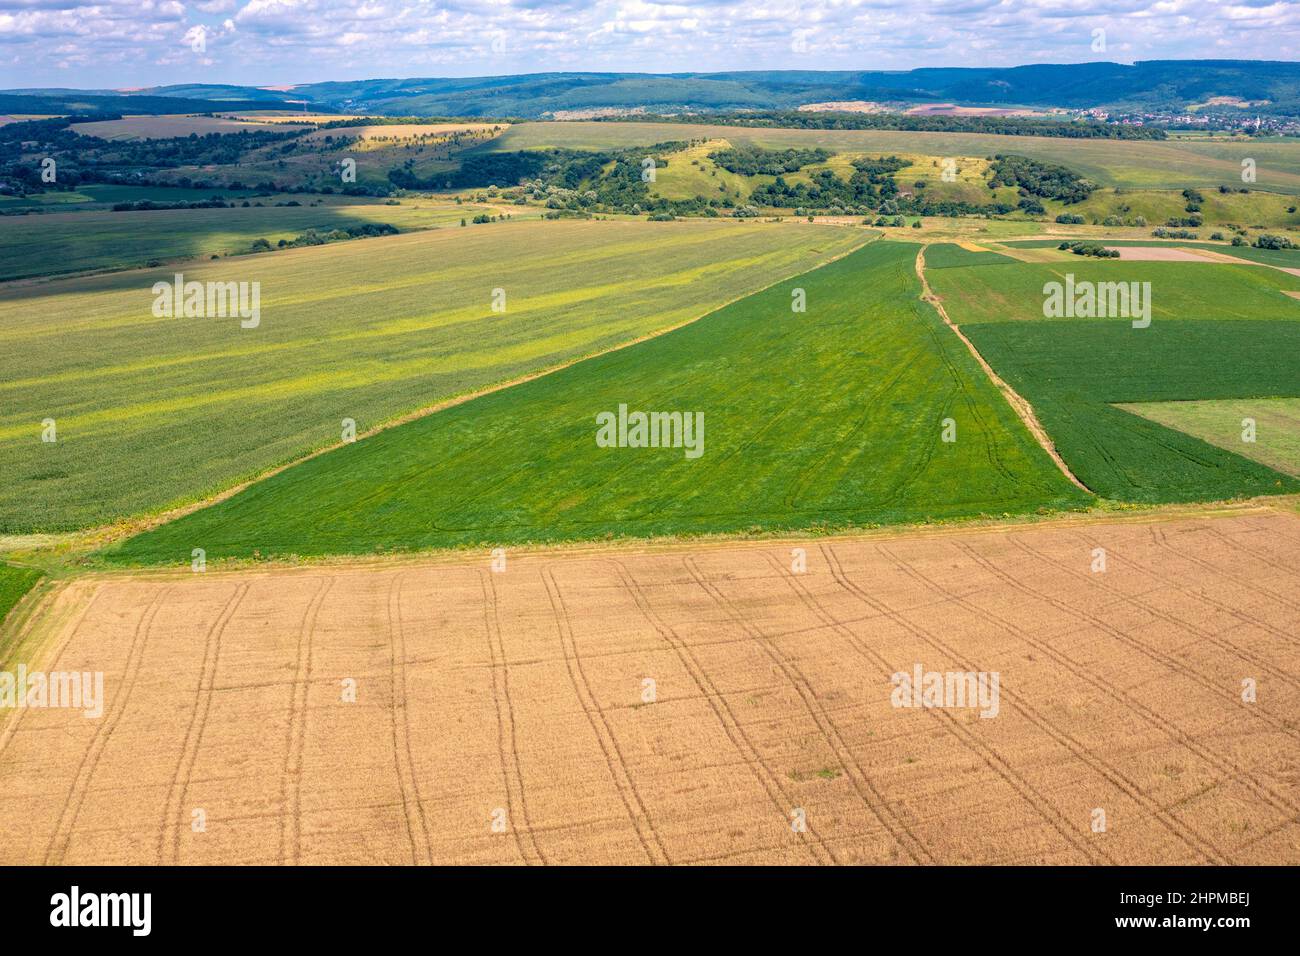 Top view of the wheat field and green fields on the hills in summer Stock Photo